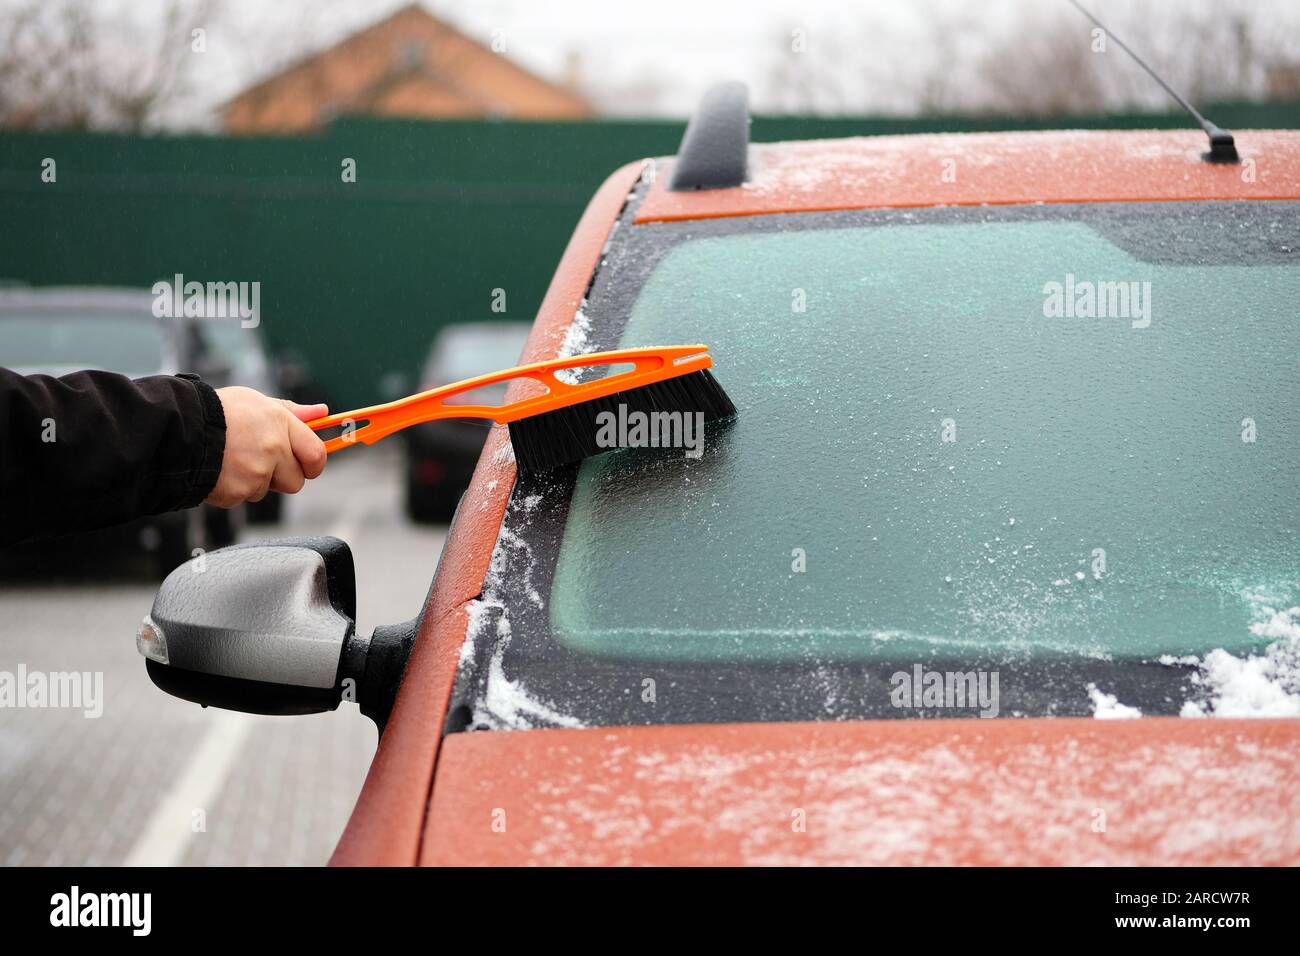 Man clears snow from icy windows of car. Brush in mans hand. Windshield of orange auto, horizontal view. Stock Photo